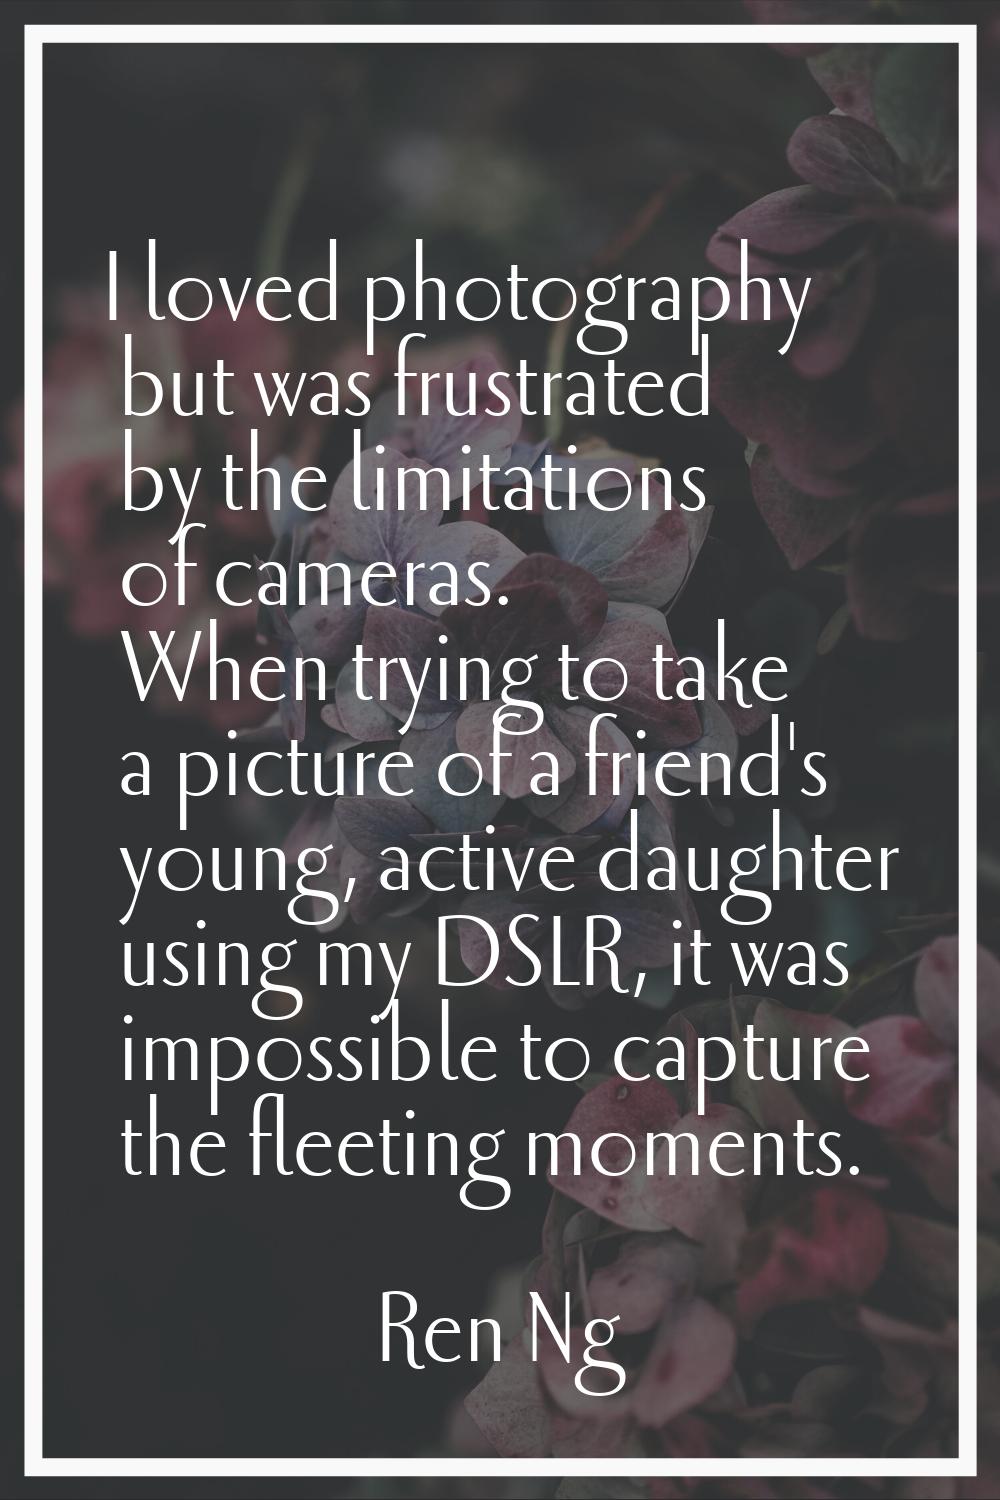 I loved photography but was frustrated by the limitations of cameras. When trying to take a picture